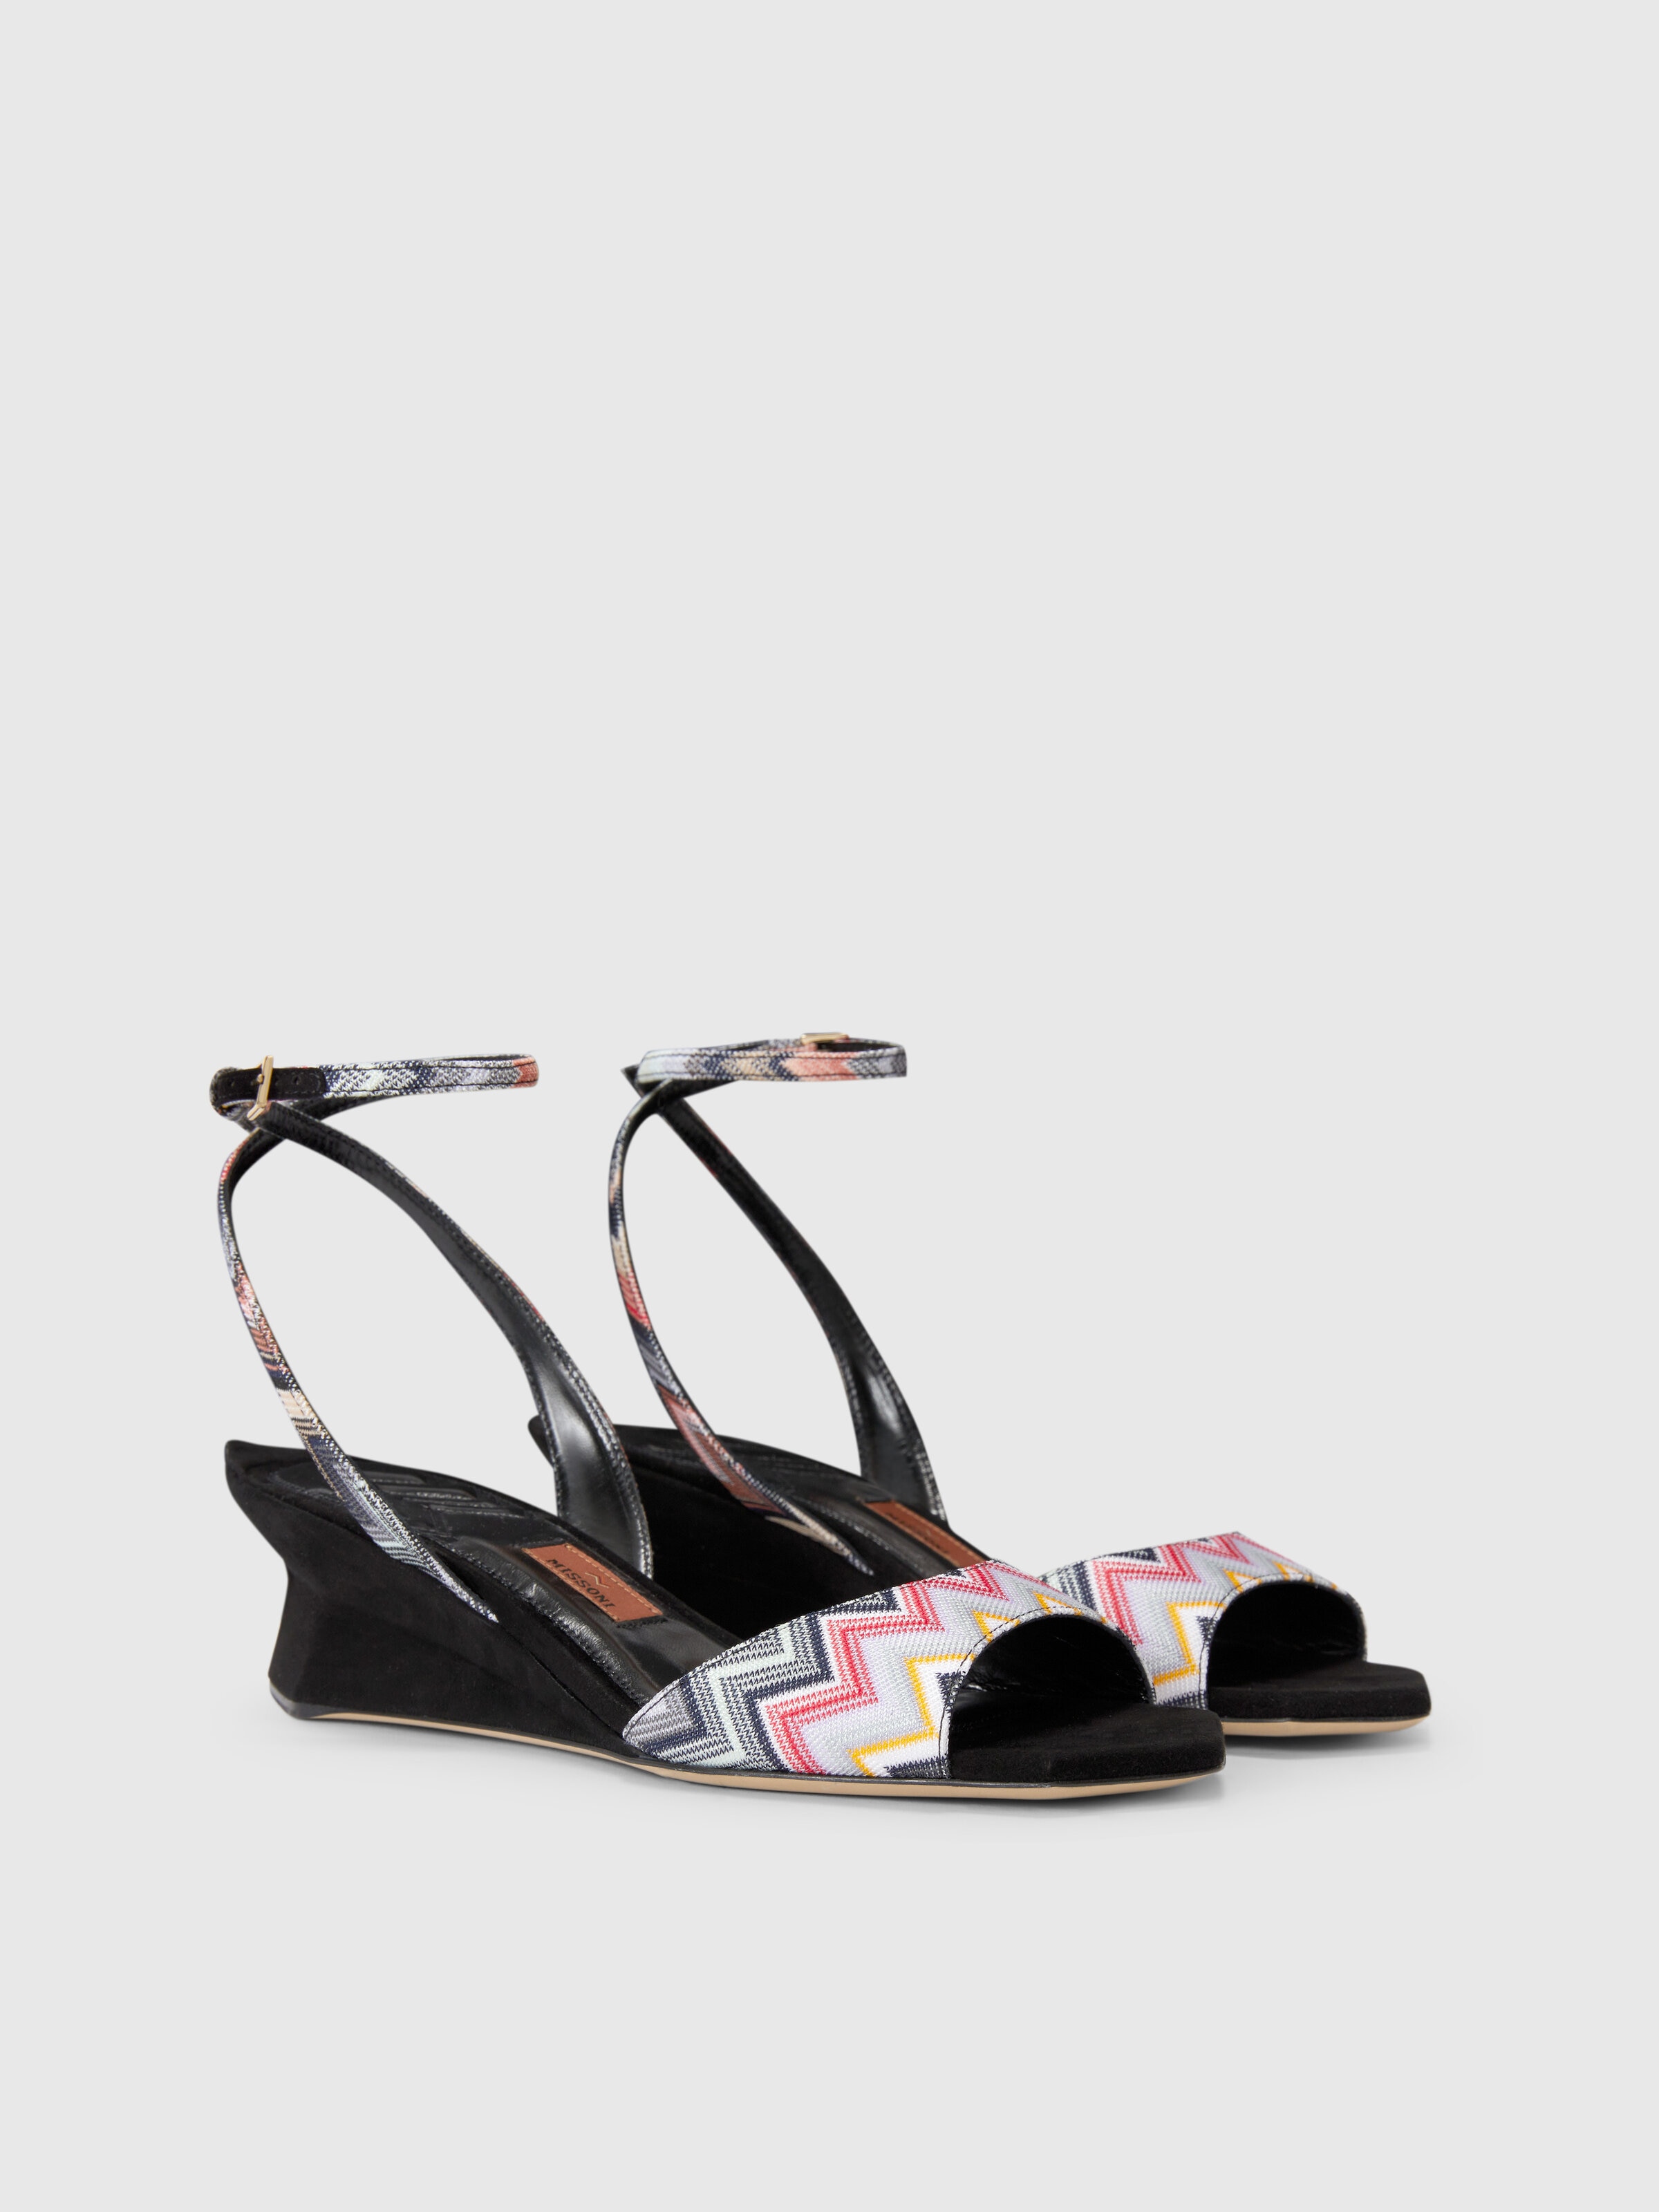 Sandals with strap and chevron pattern, Black    - 1